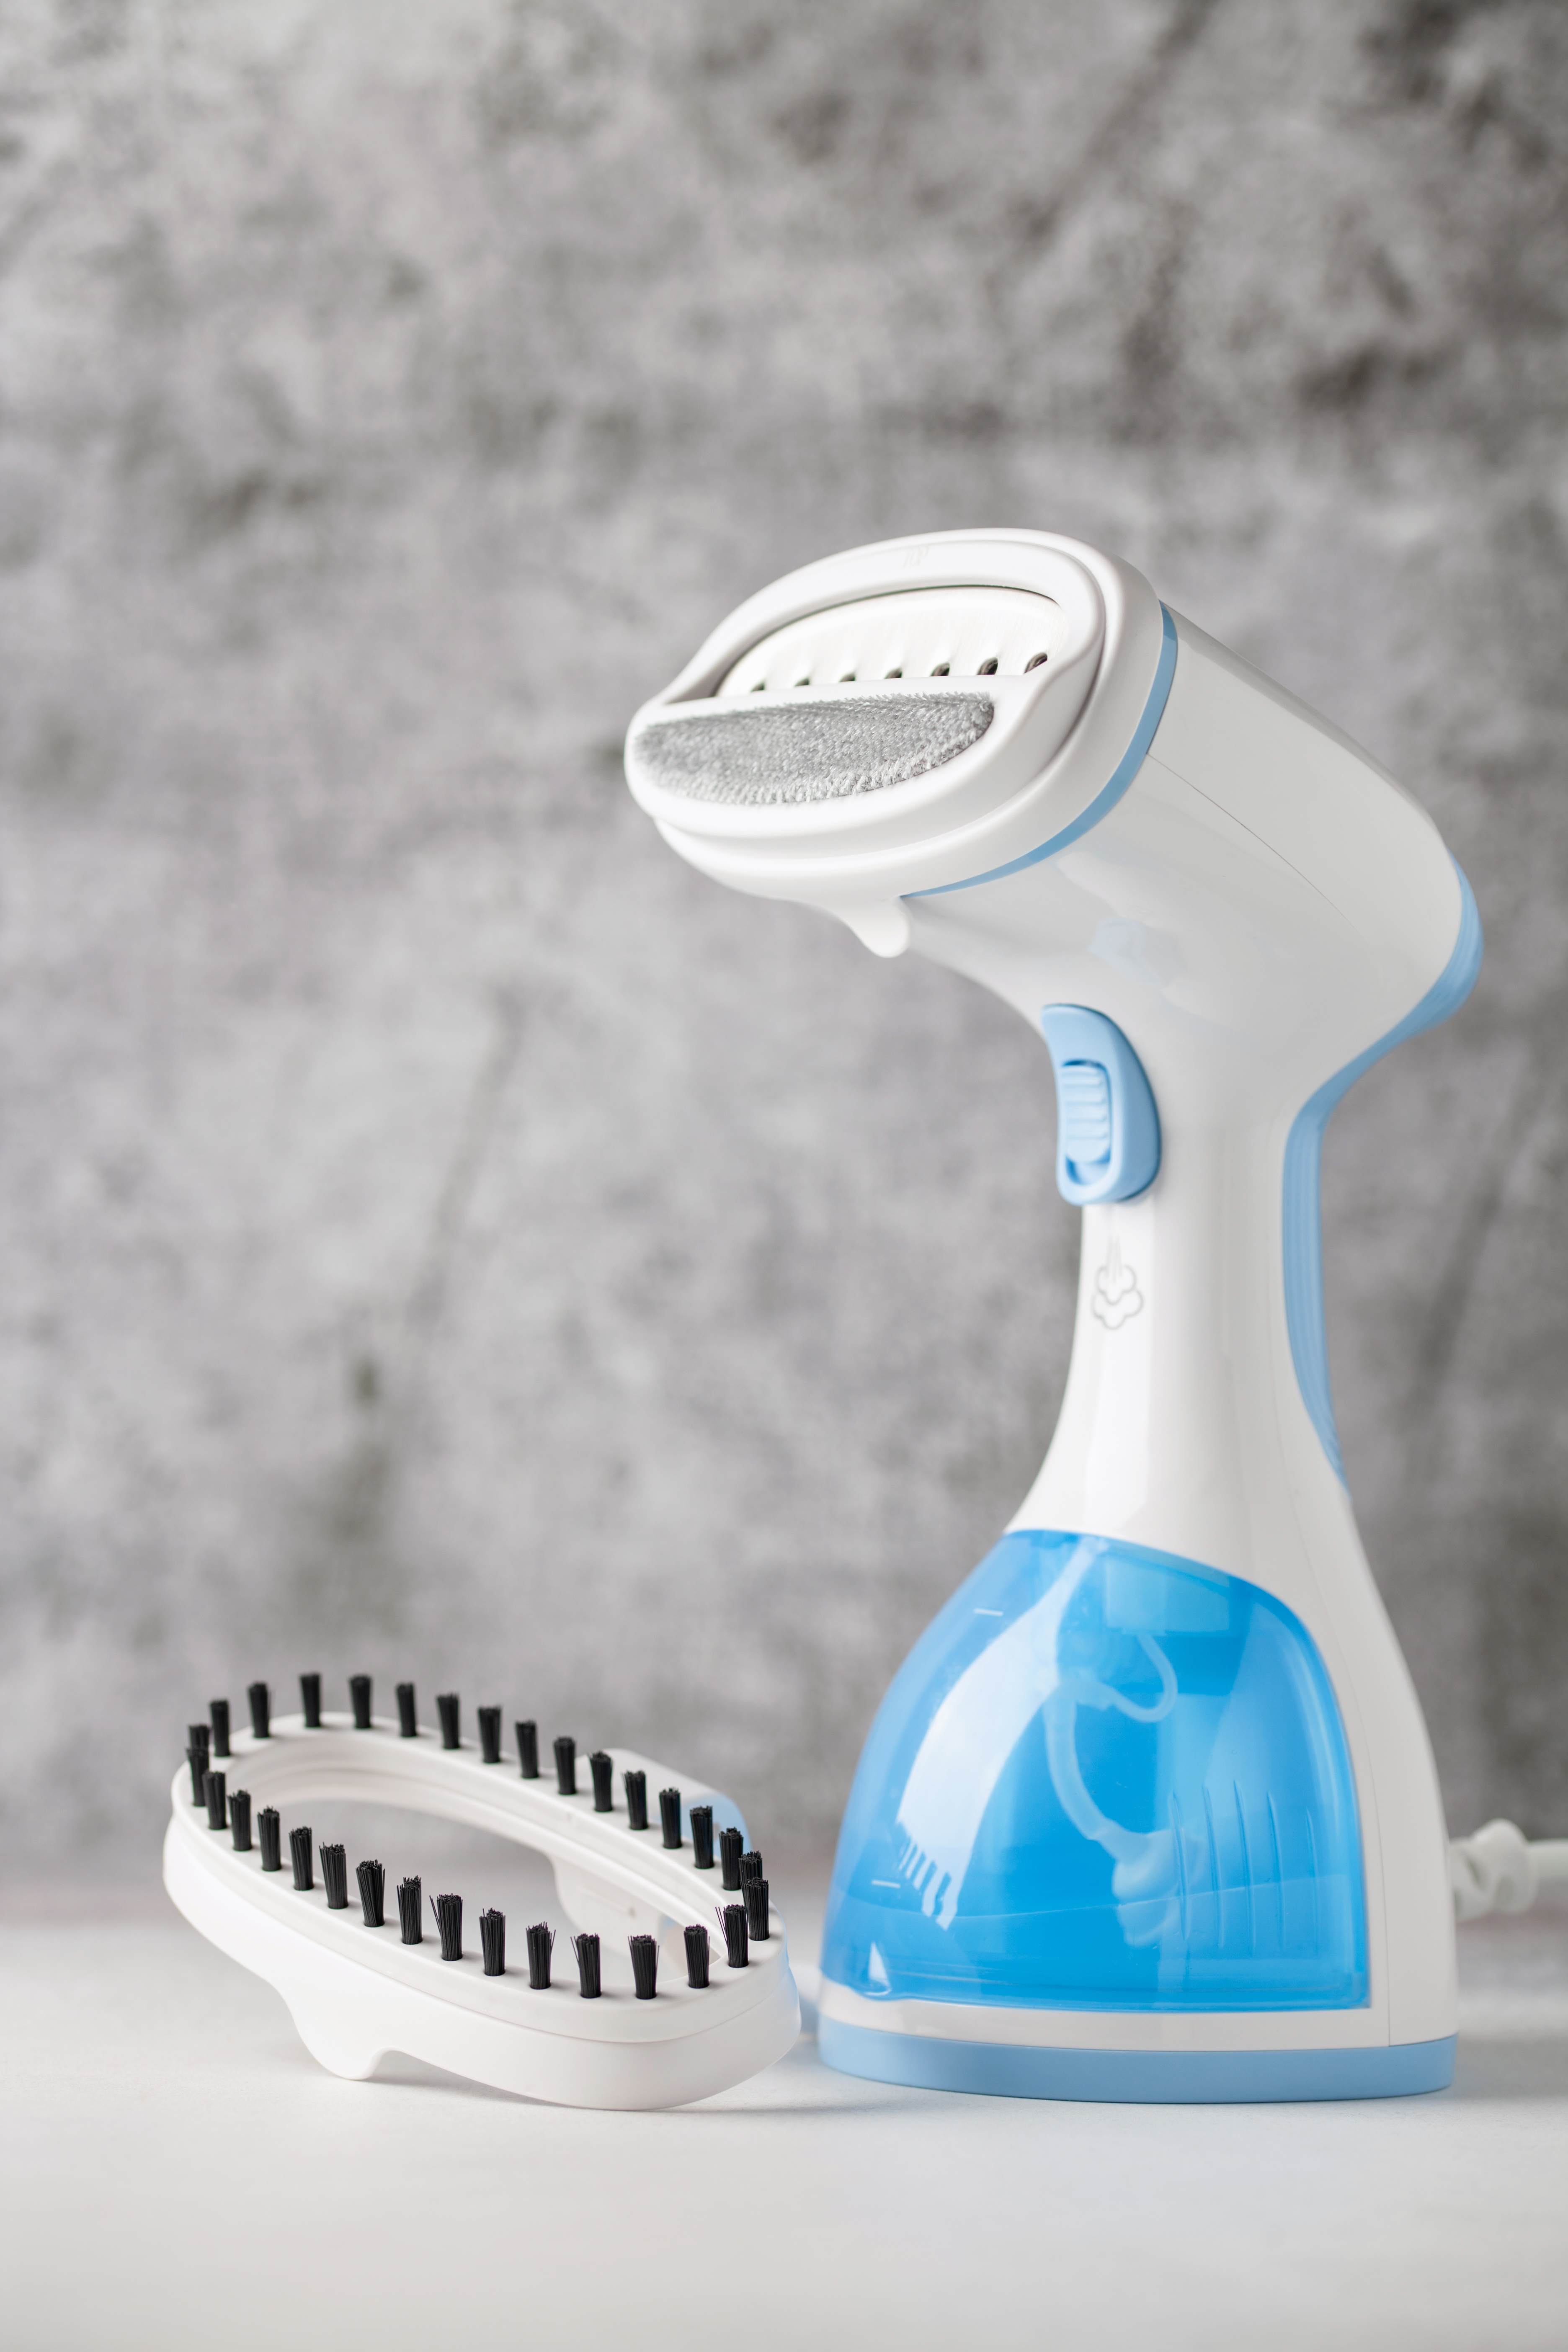 How to Clean a Clothes Steamer